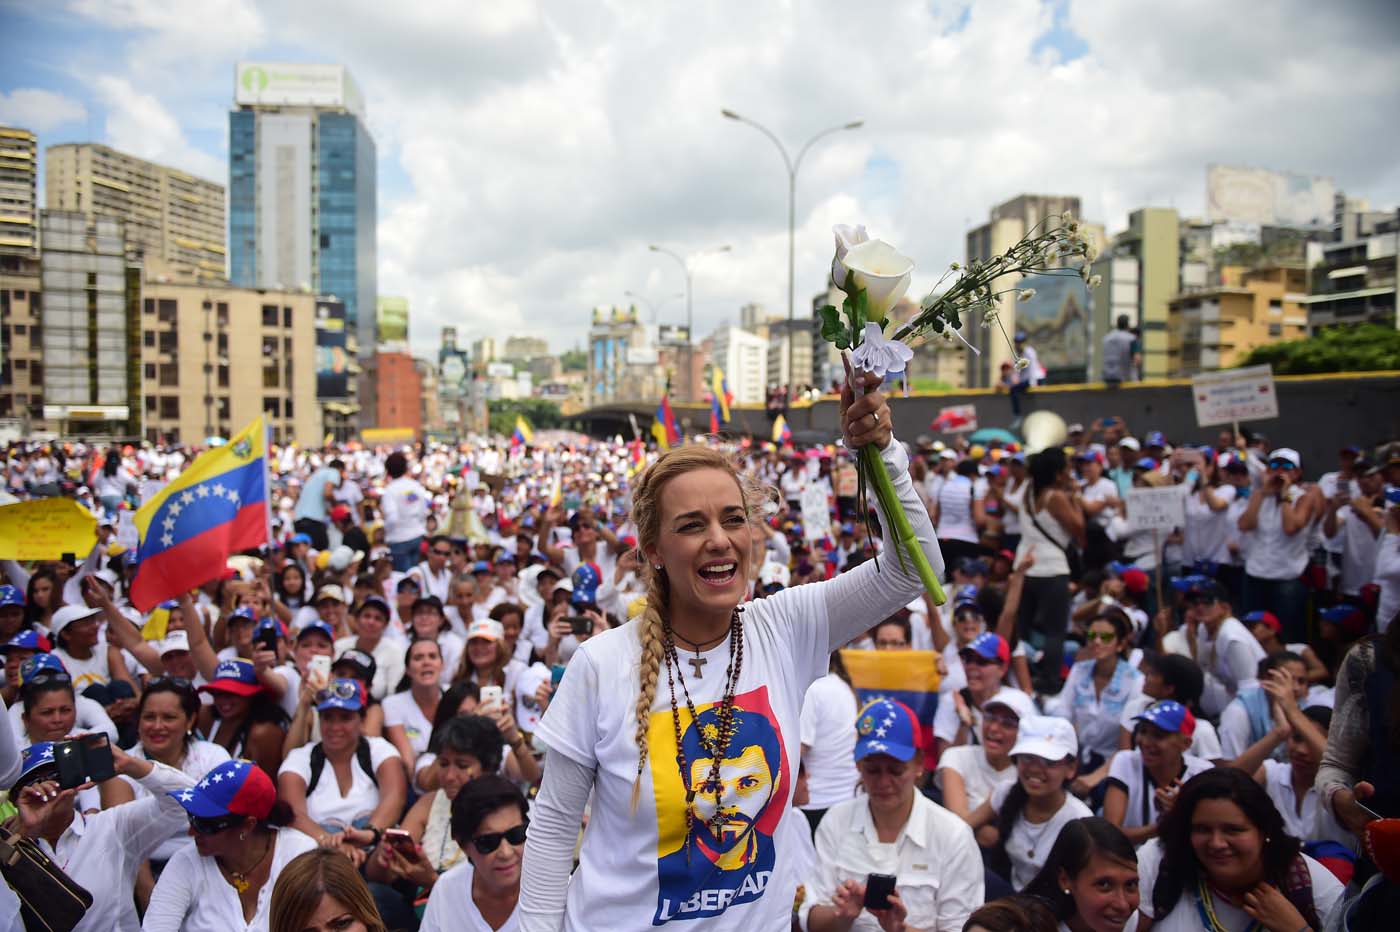 The wife of imprisoned opposition leader Leopoldo Lopez, Lilian Tintori (C), takes part in a women's march aimed to keep pressure on President Nicolas Maduro, whose authority is being increasingly challenged by protests and deadly unrest, in Caracas on May 6, 2017. The death toll since April, when the protests intensified after Maduro's administration and the courts stepped up efforts to undermine the opposition, is at least 36 according to prosecutors. / AFP PHOTO / RONALDO SCHEMIDT